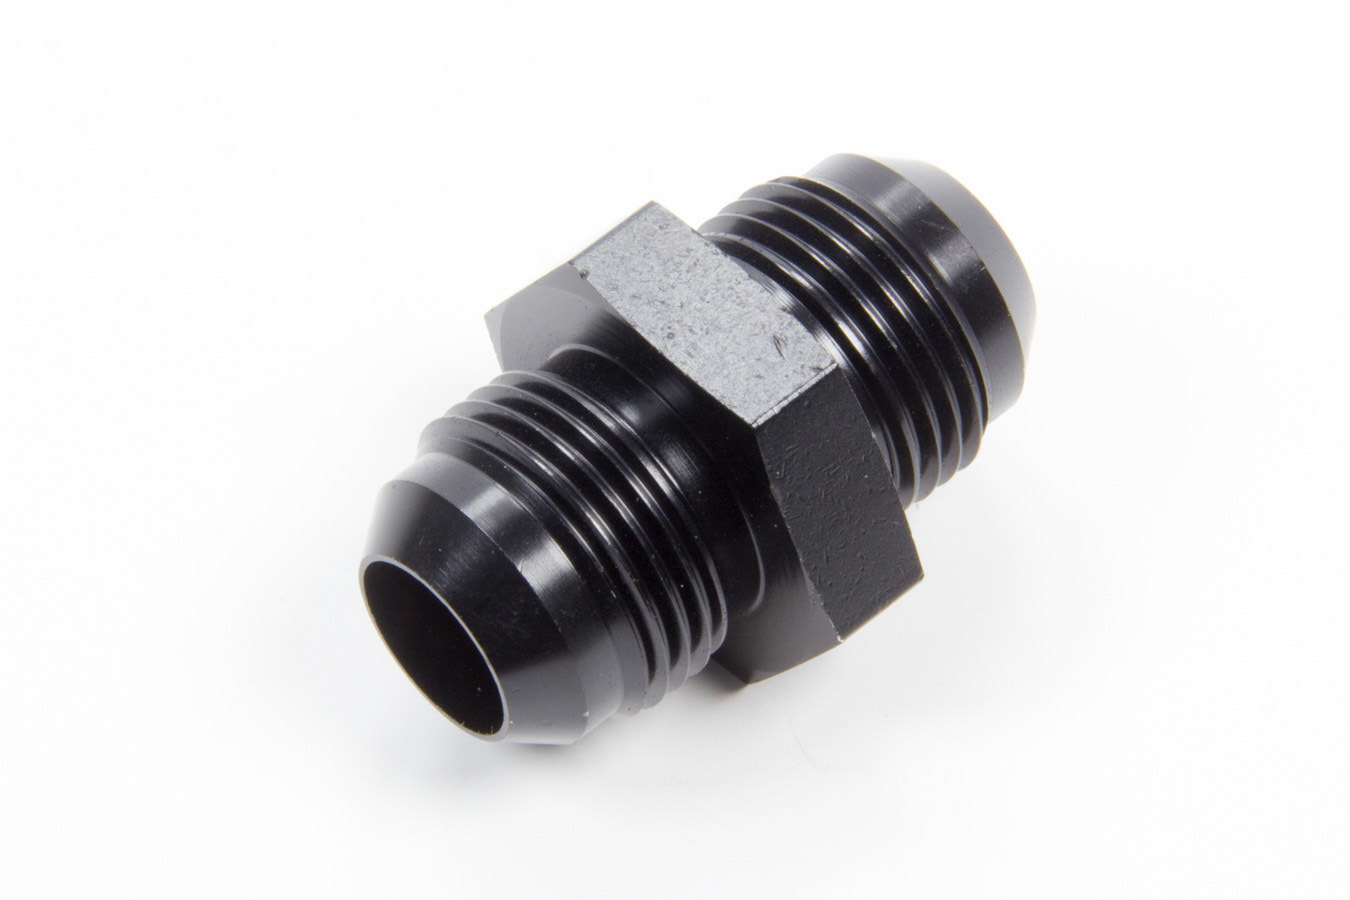 Aeroquip FCM5055 Fitting, Adapter, Straight, 12 AN Male to 12 AN Male, Aluminum, Black Anodized, Each